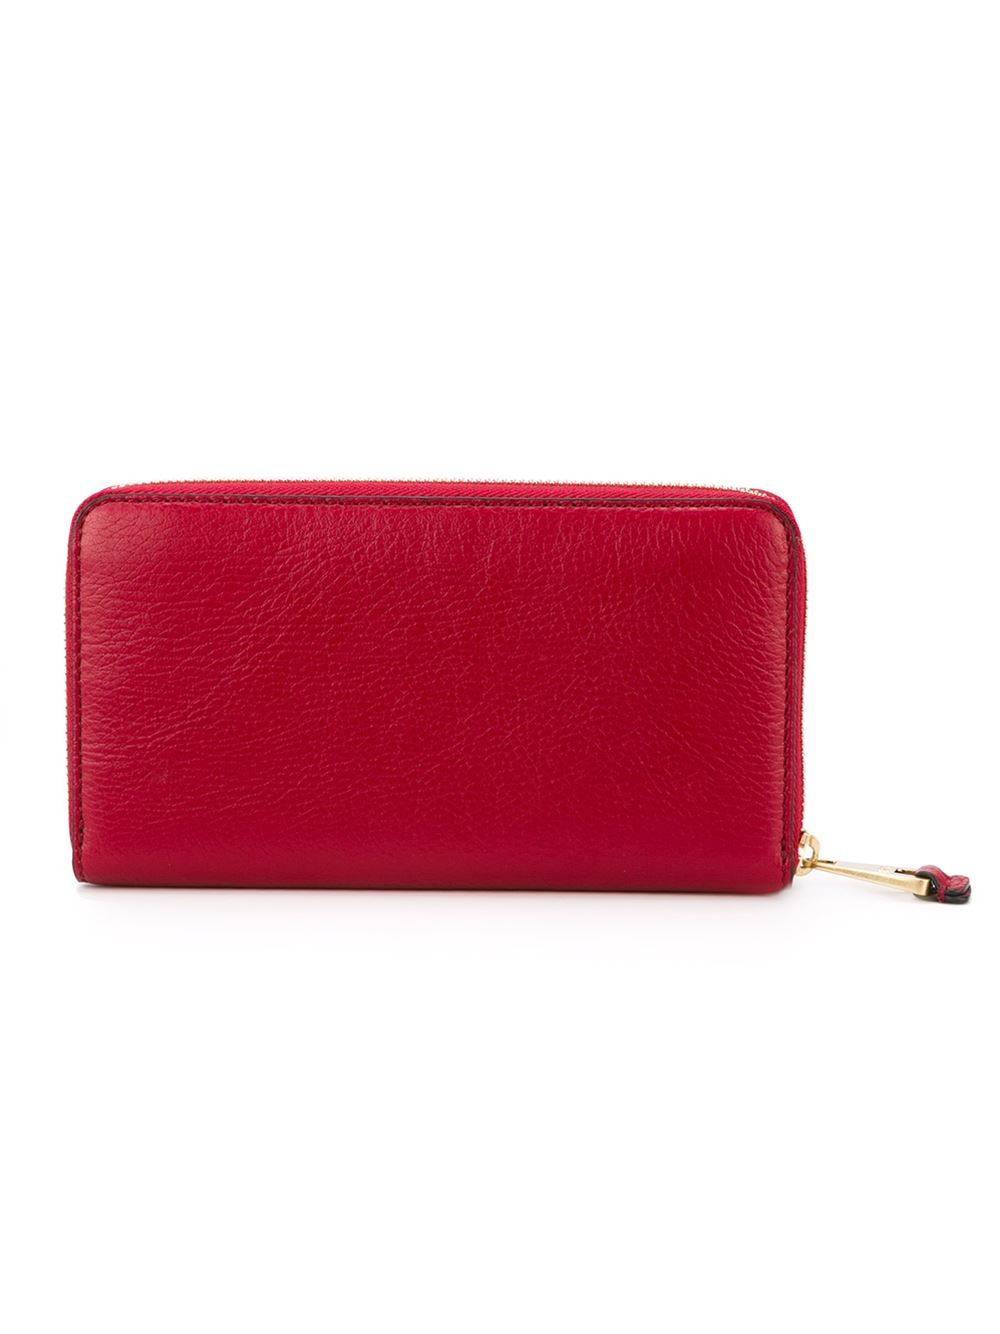 Lyst - Emporio Armani Continental Wallet in Red